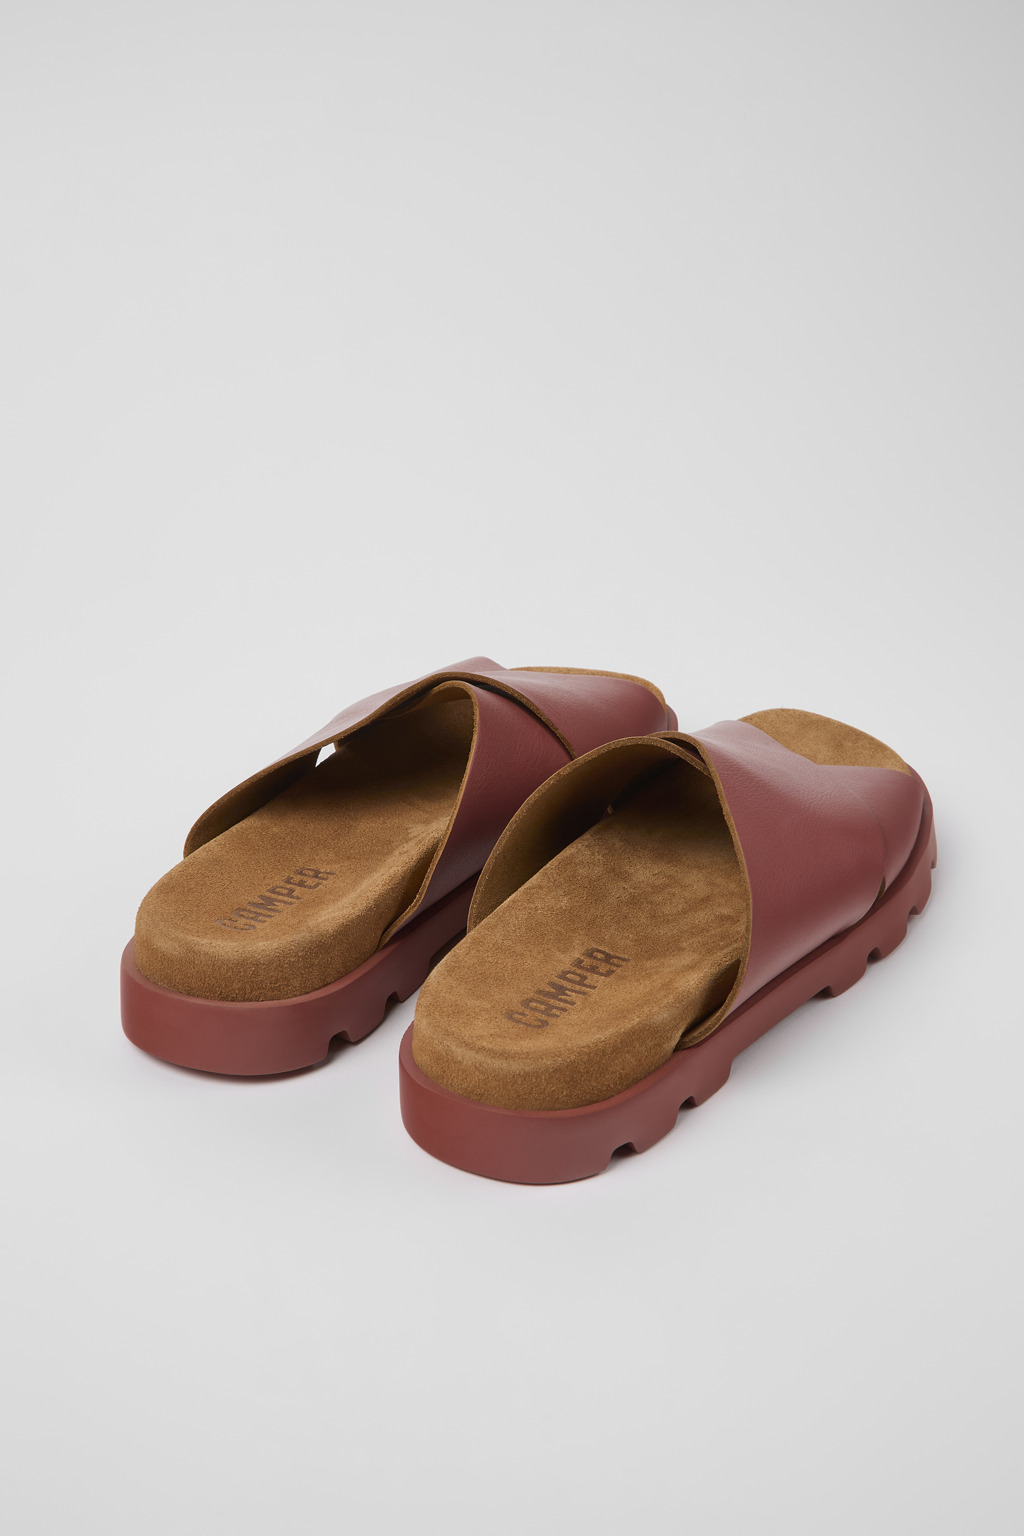 Brutus Red Sandals for Women - Spring/Summer collection 